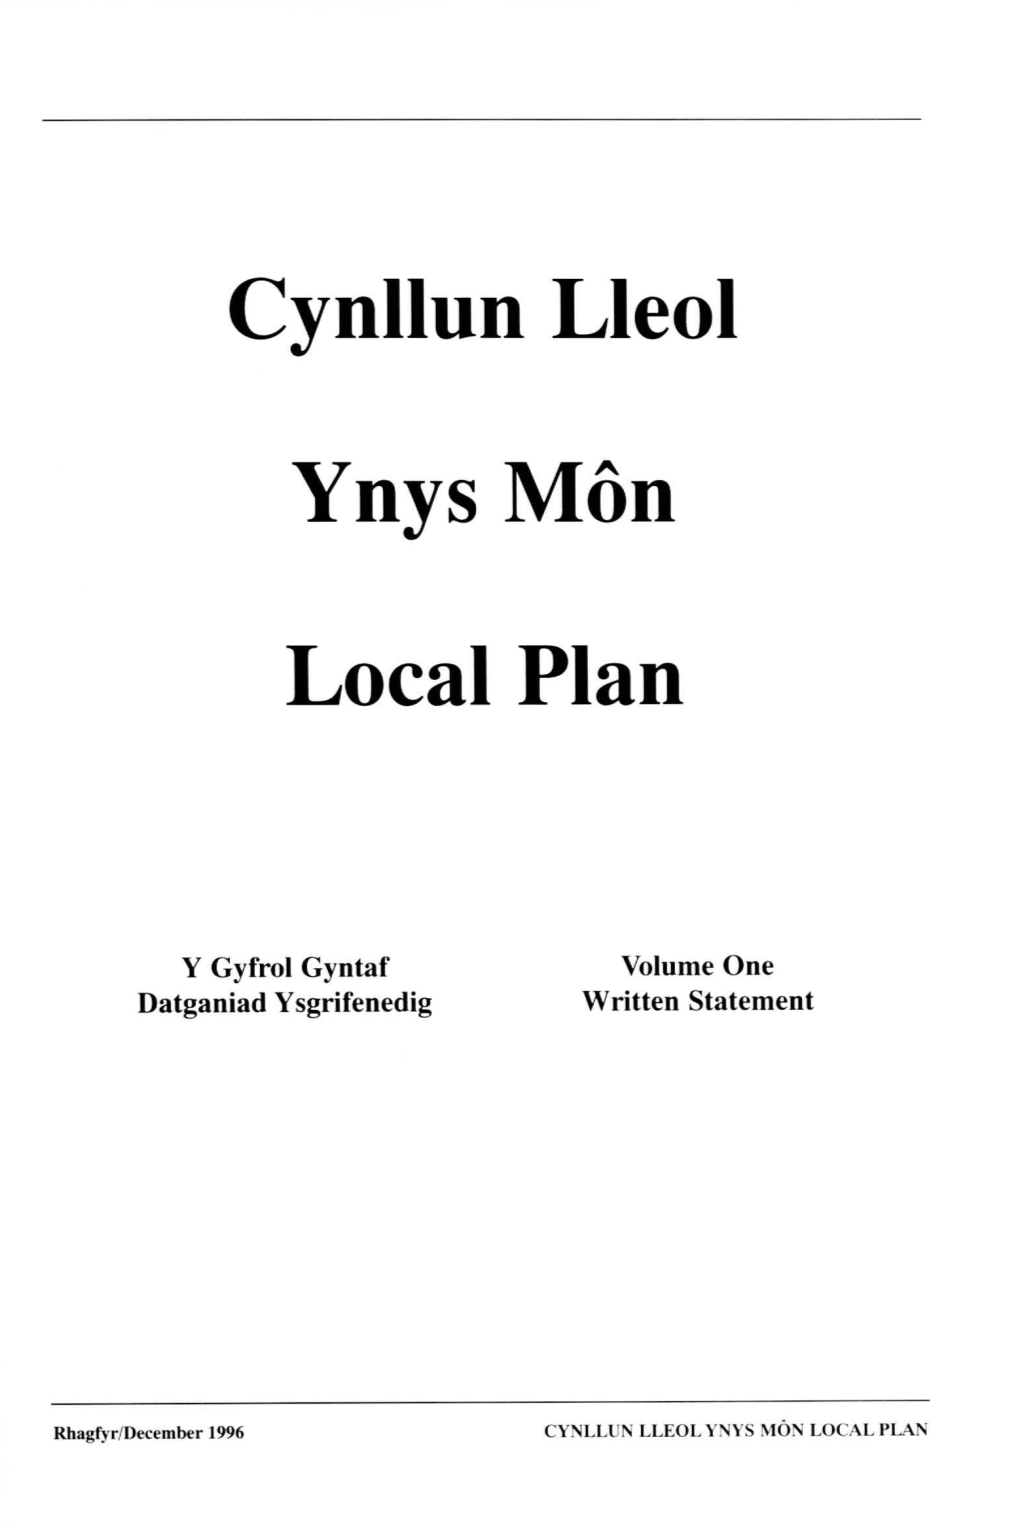 Local Plan for a Small Part of the Borough (The Menai Strait Local Plan) and Even This Is Becoming out of Date